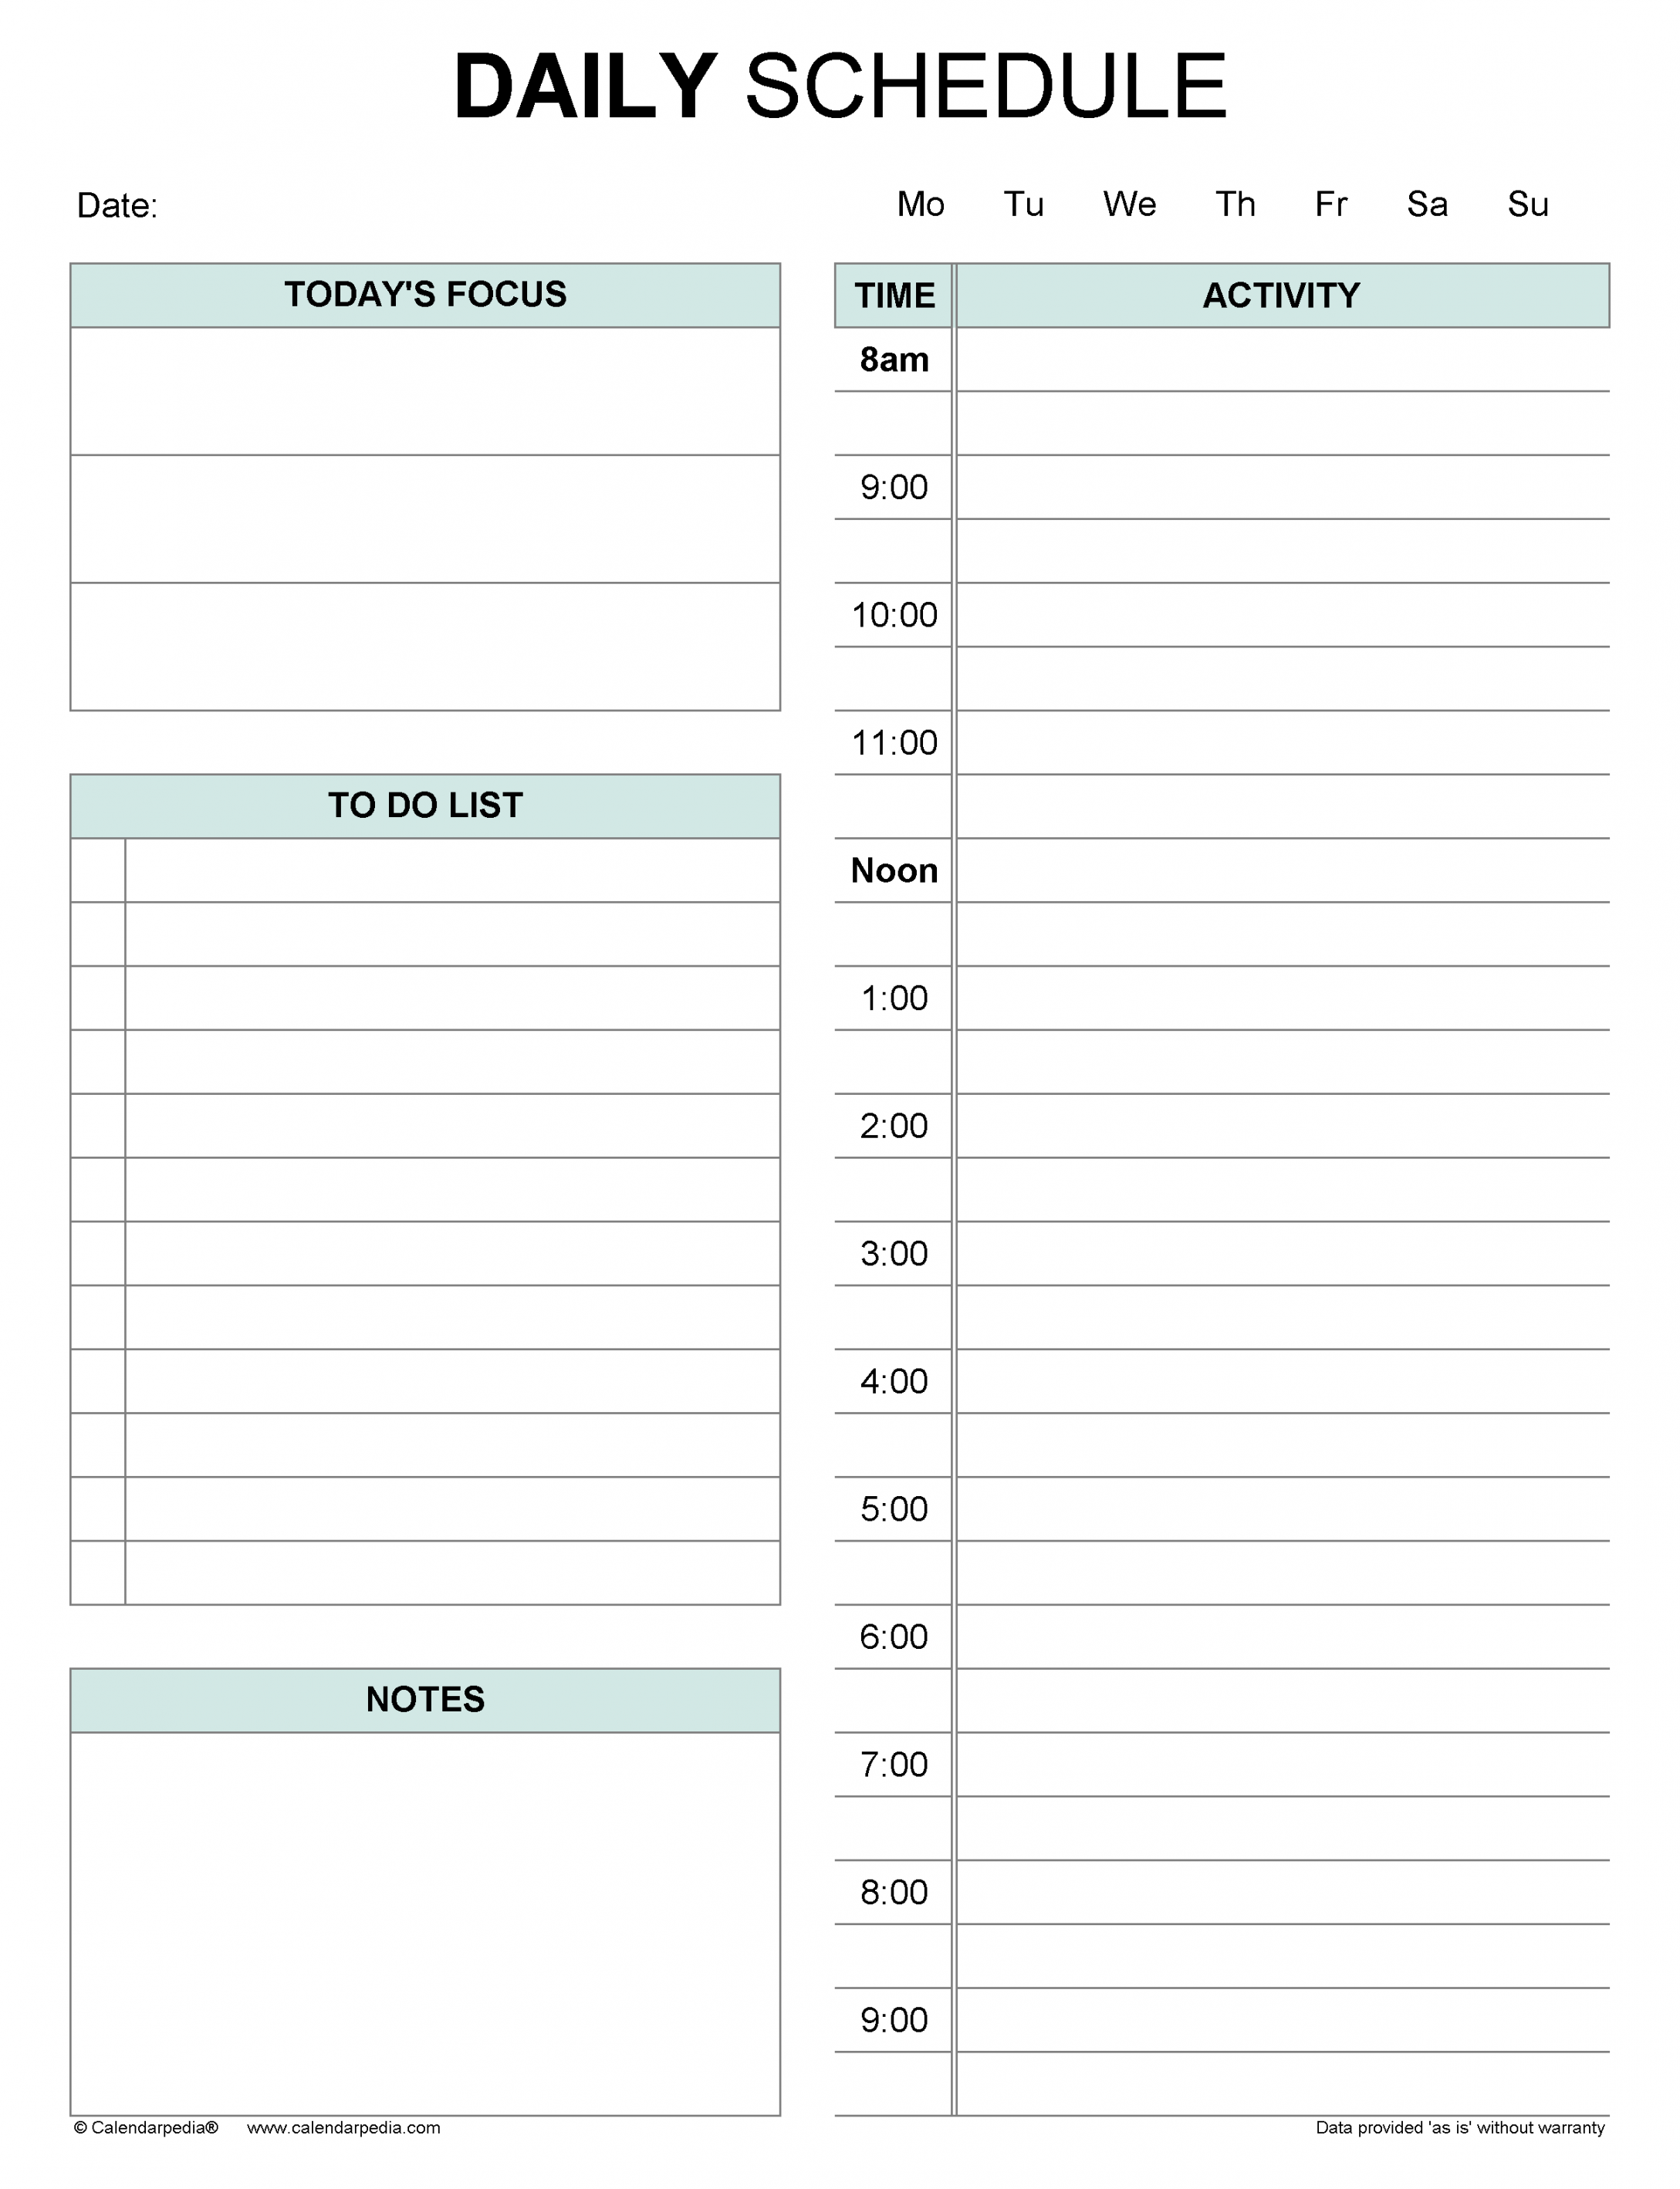 Free Daily Schedules in PDF Format - + Templates